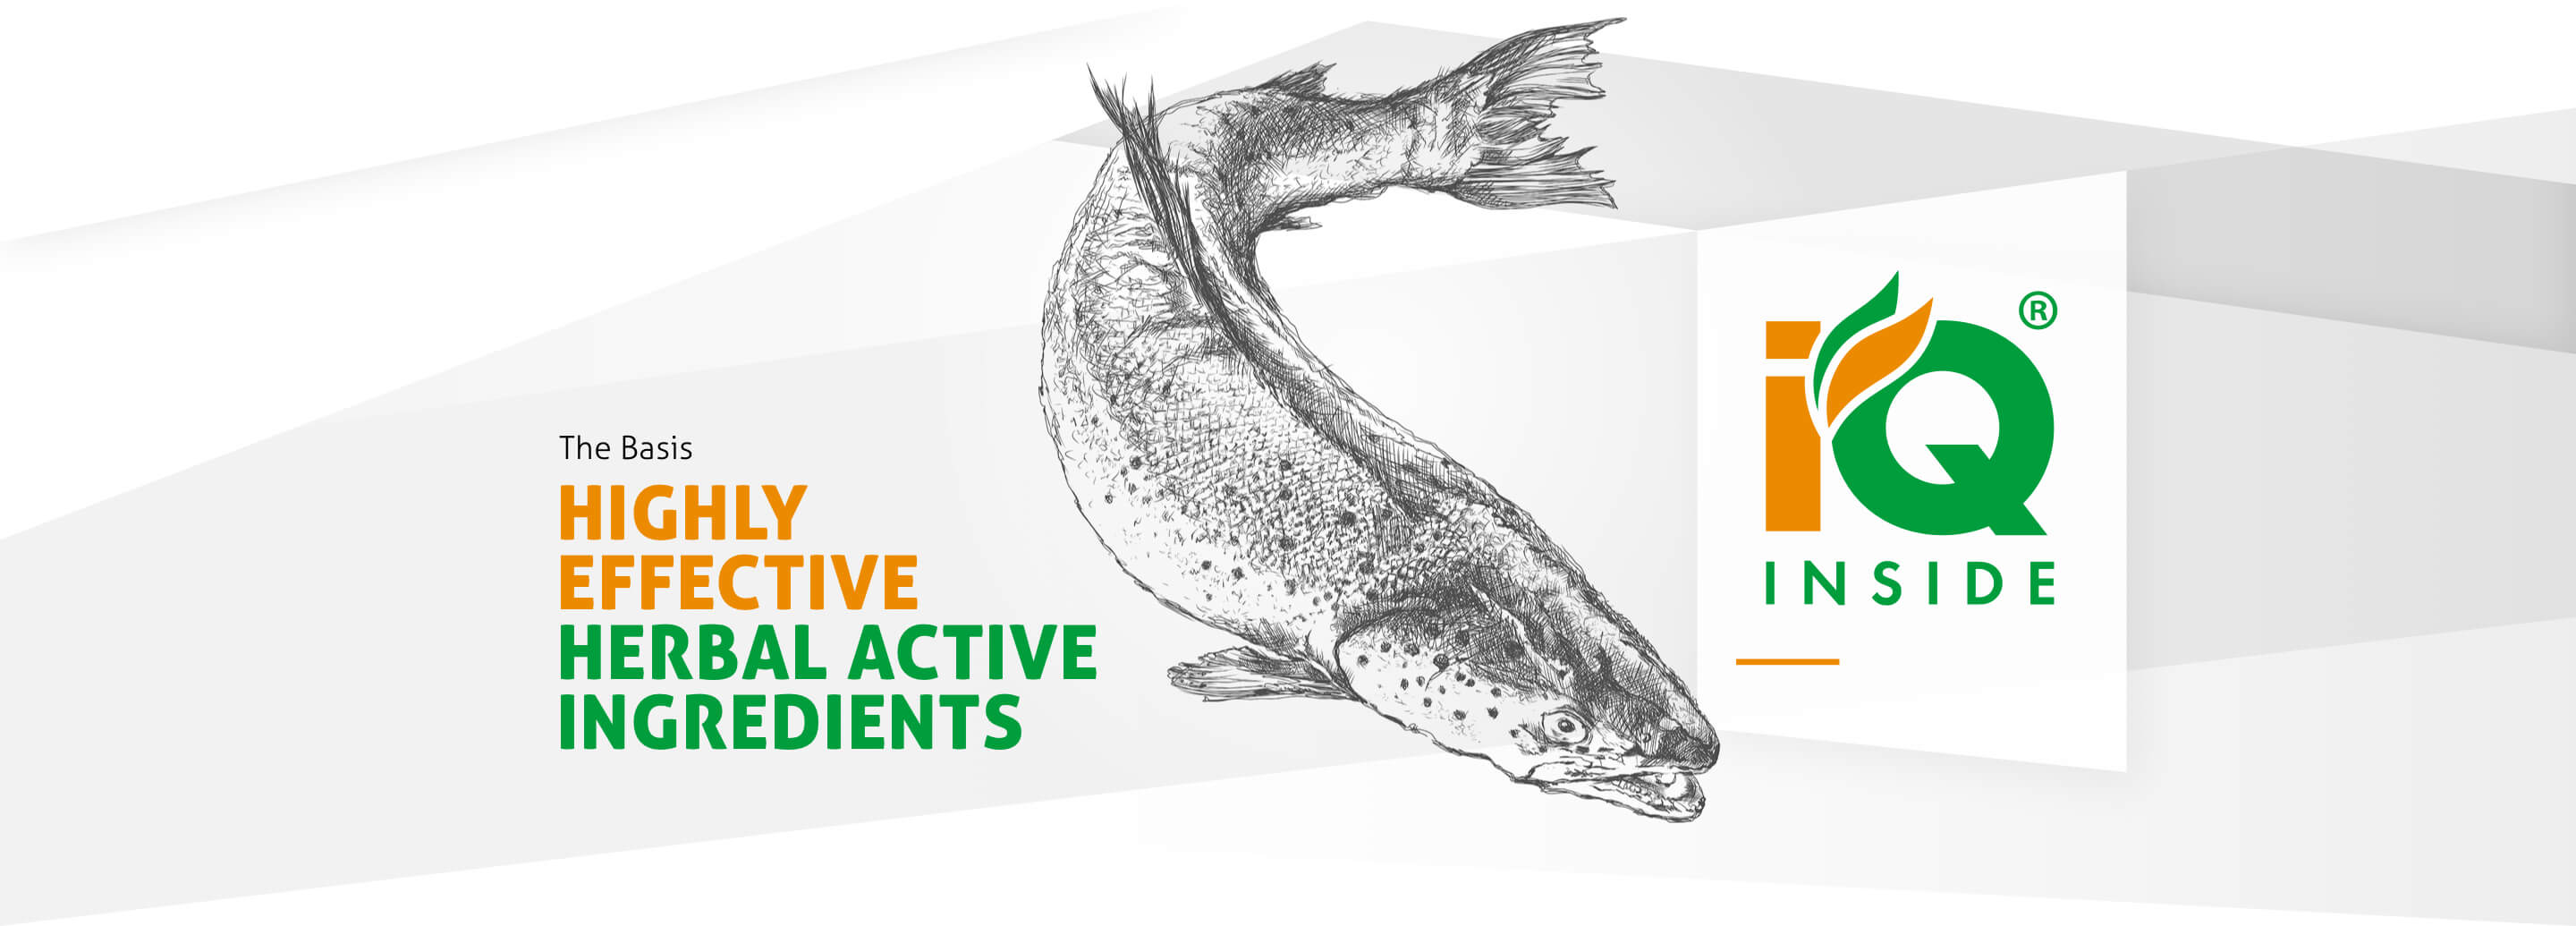 A fish drawn in black and white. Next to the fish is the English claim "Highly effective herbal active ingredients".